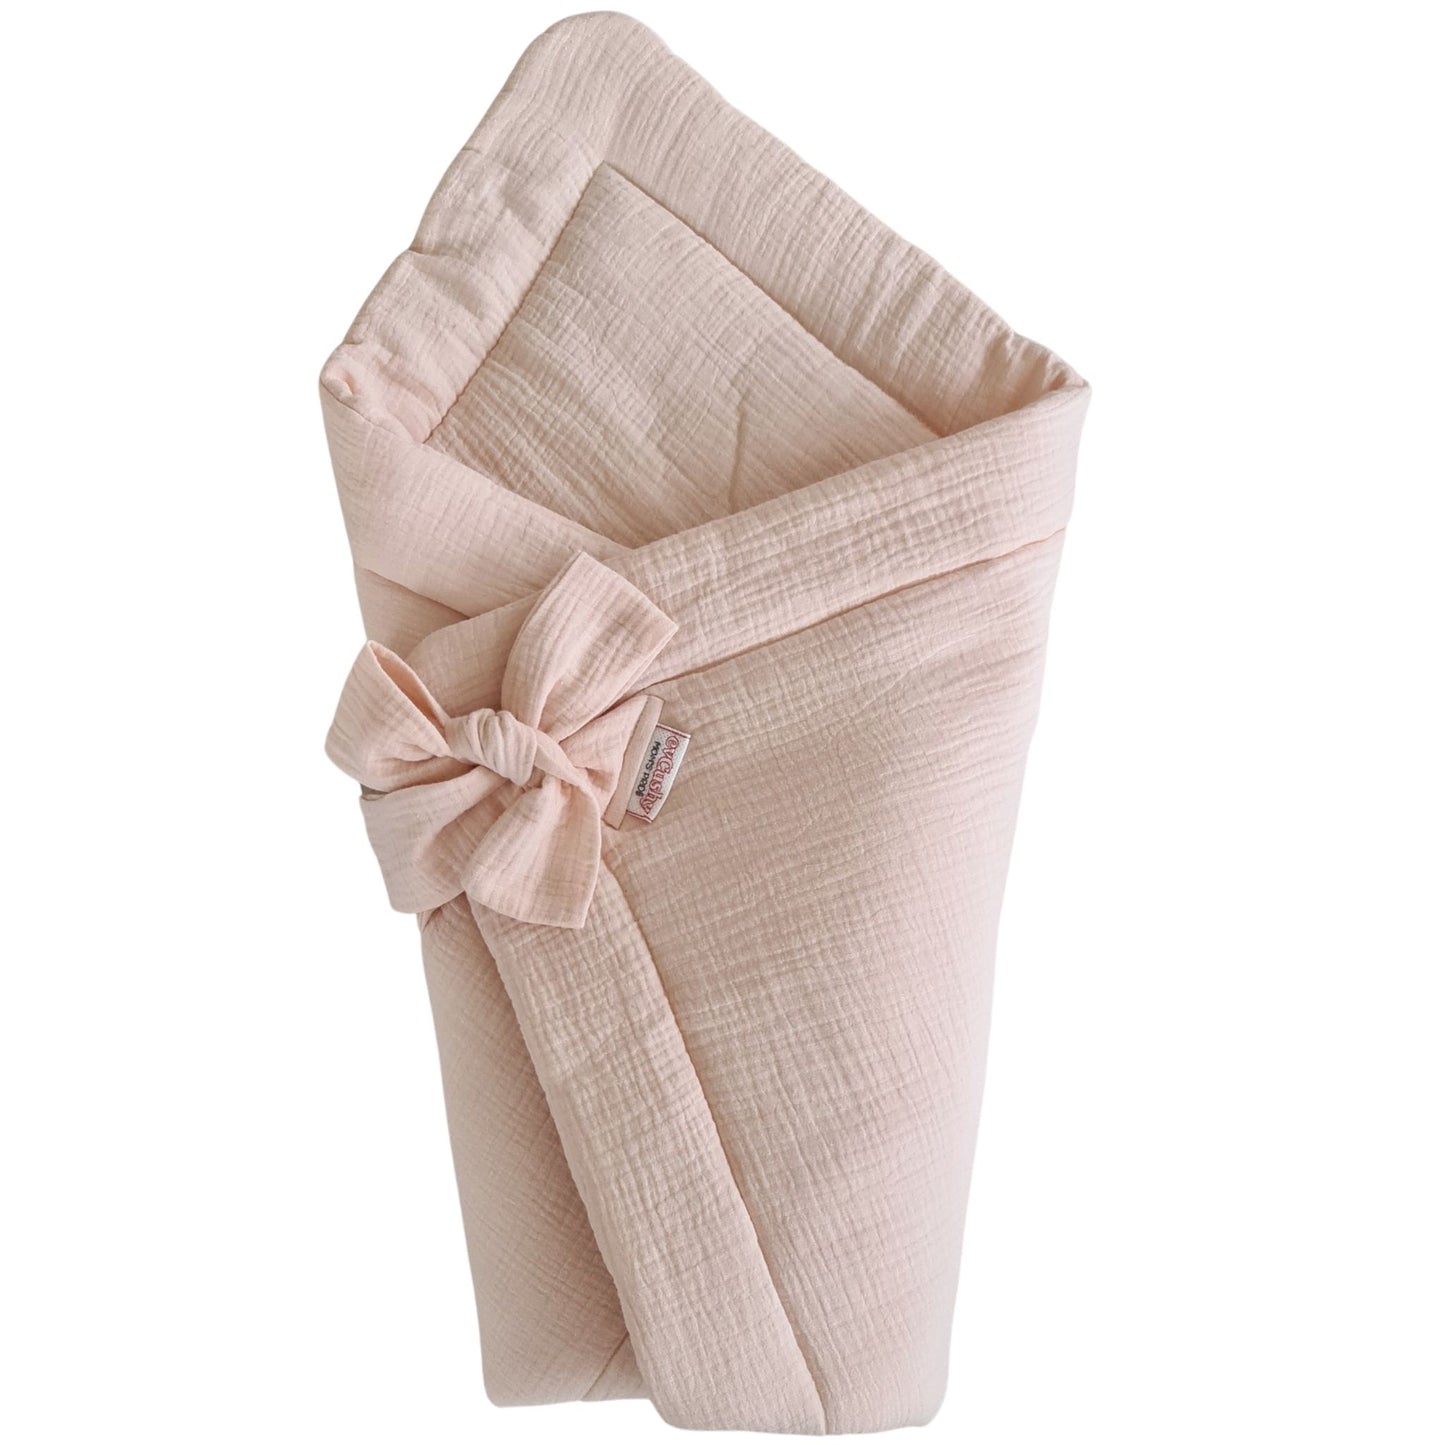 evcushy baby wrap 3 in 1 swaddling blanket pink cotton